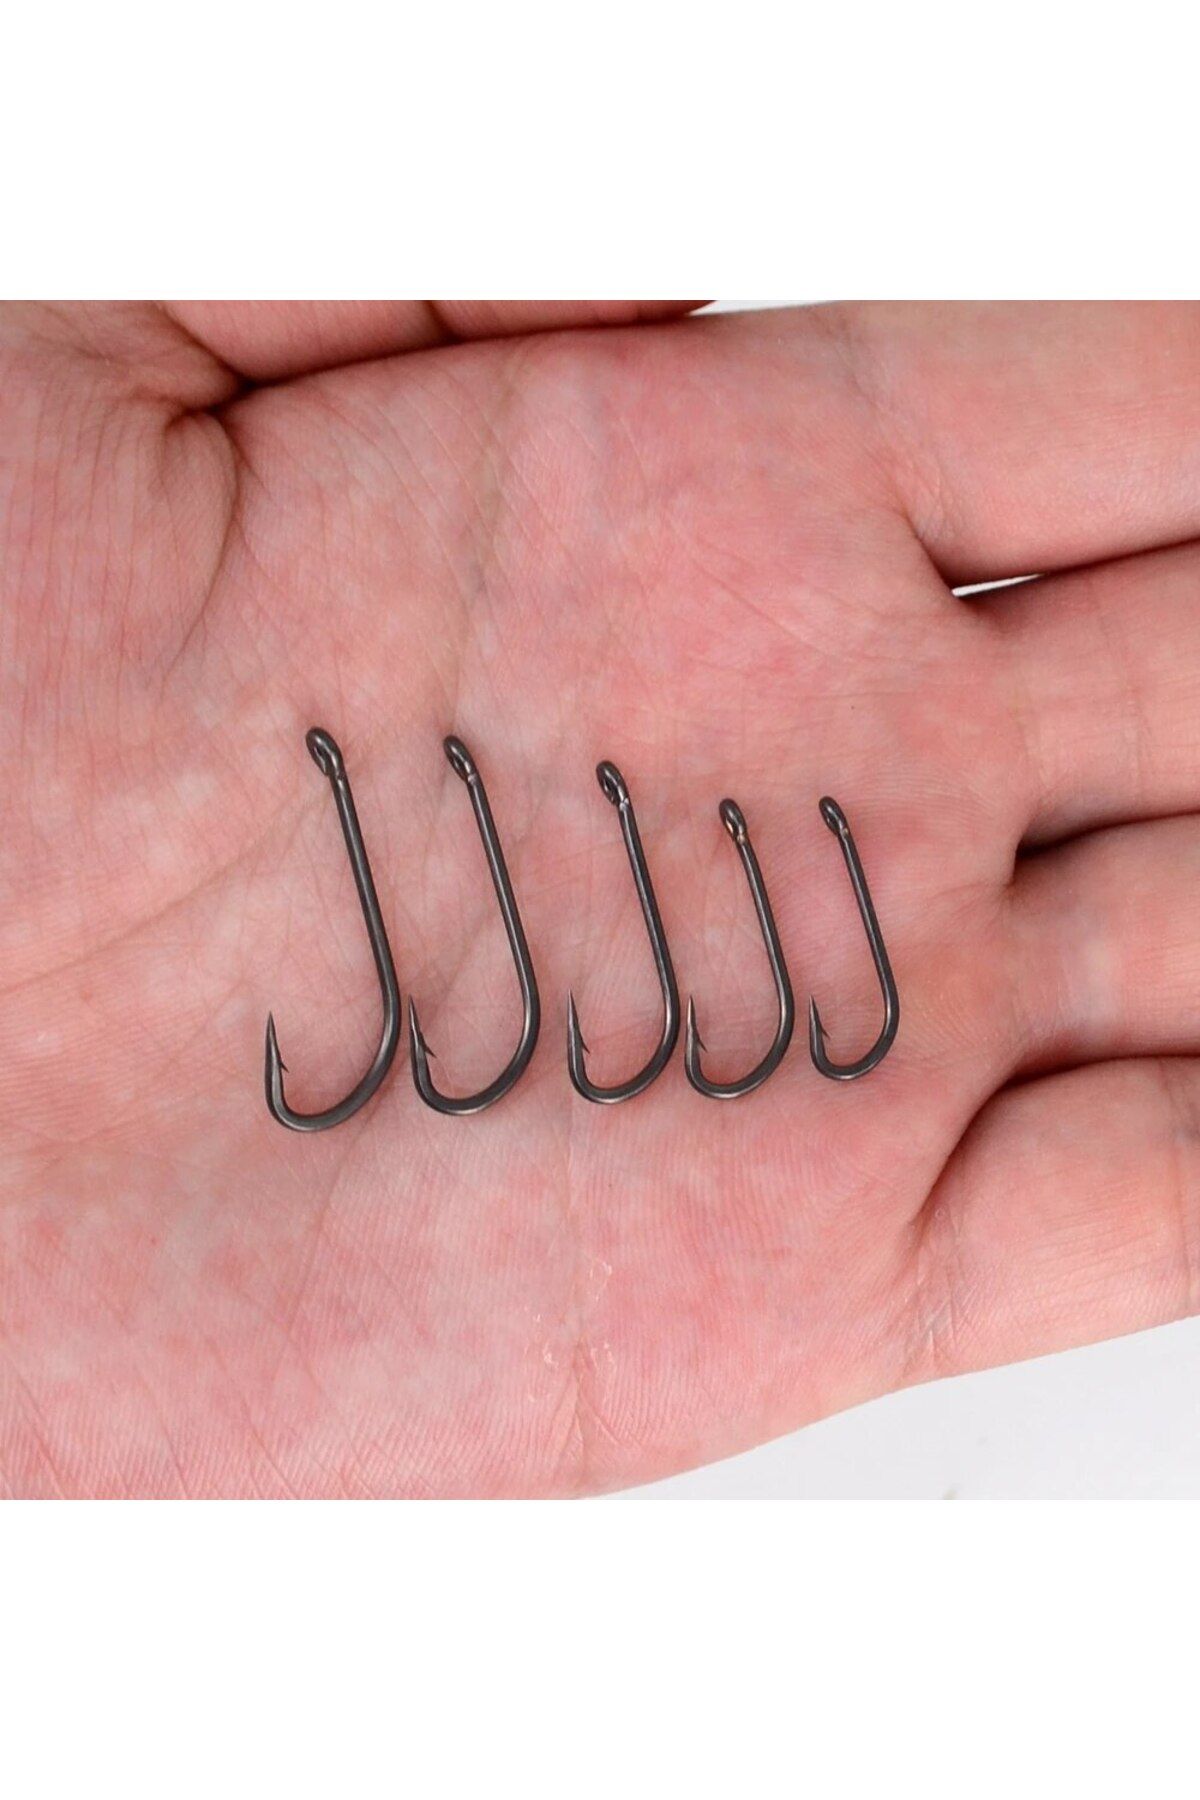 Choice HIRISI High Carbon Steel Barbed Fish Hooks 15pcs PTFE Coated Ideal  for Carp Fishing - Trendyol